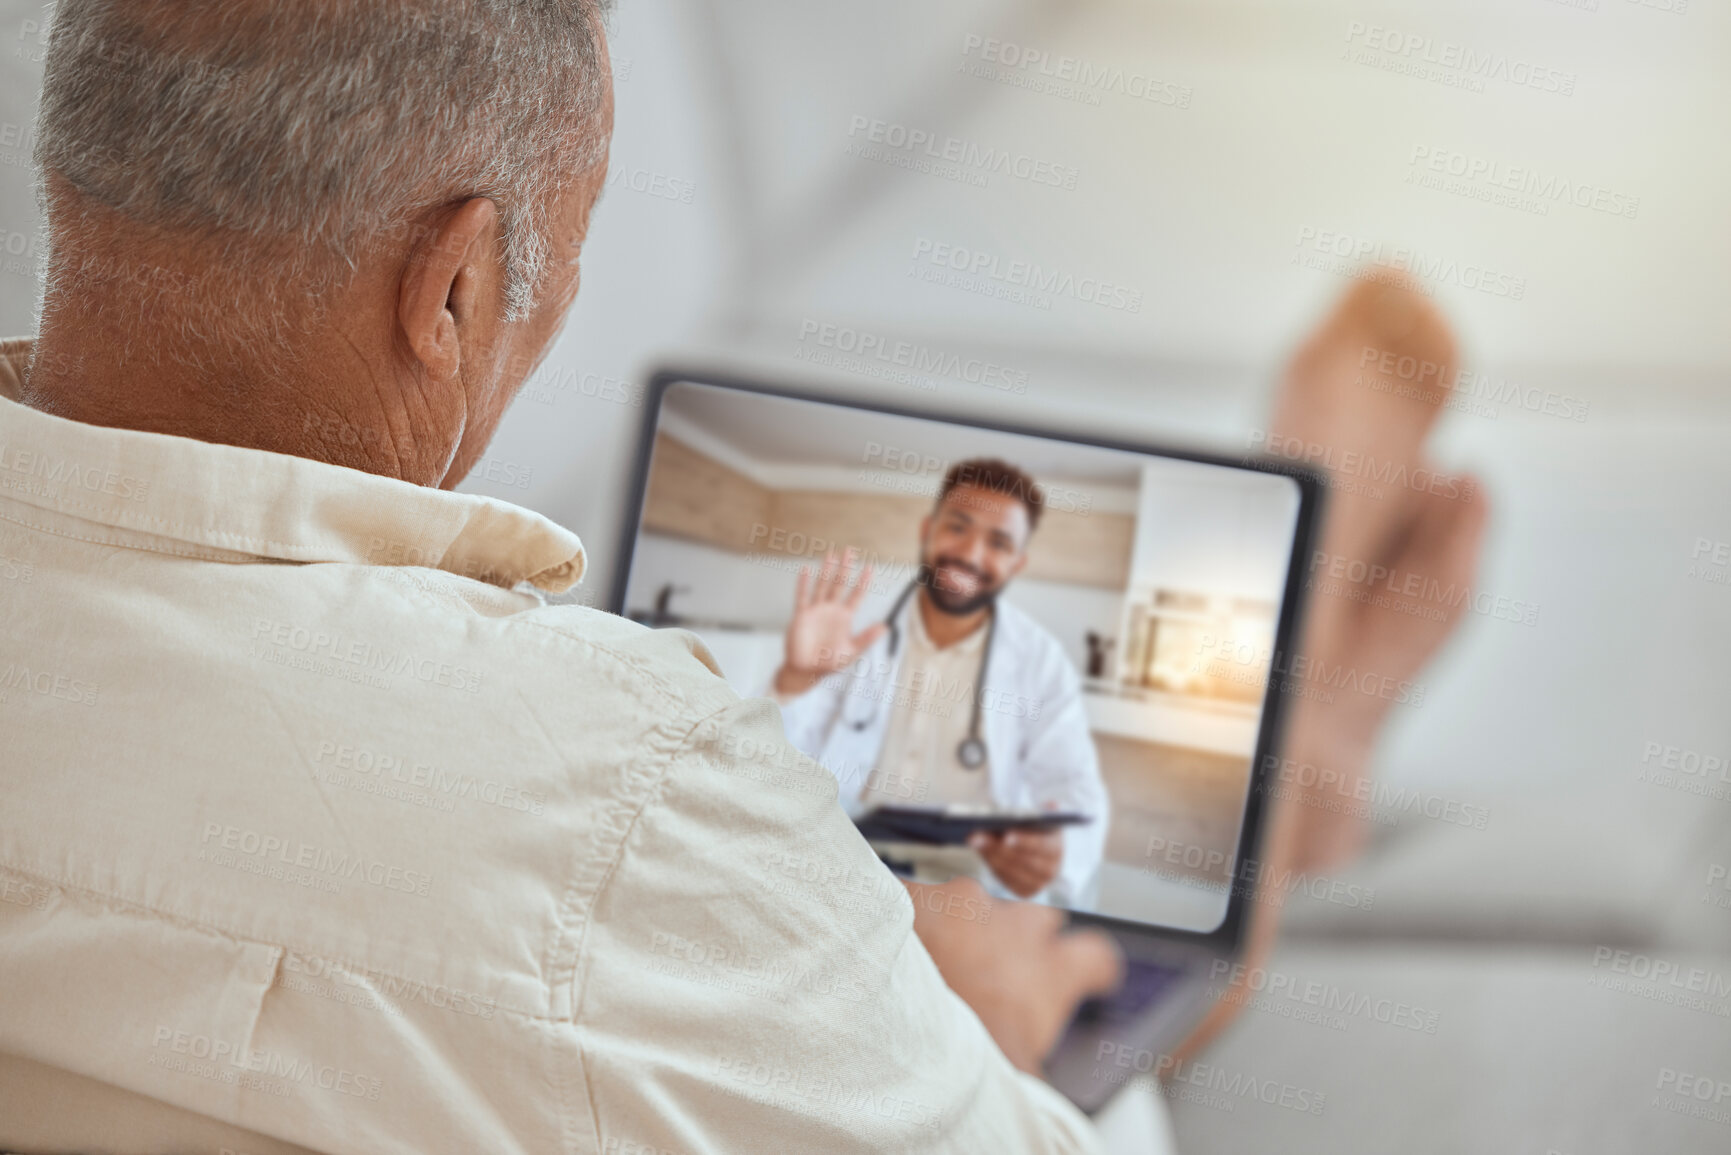 Buy stock photo Laptop, healthcare and video call with a patient and doctor in an online medical assessment or remote consultation. Computer, internet and home consulting with a man talking to a health professional